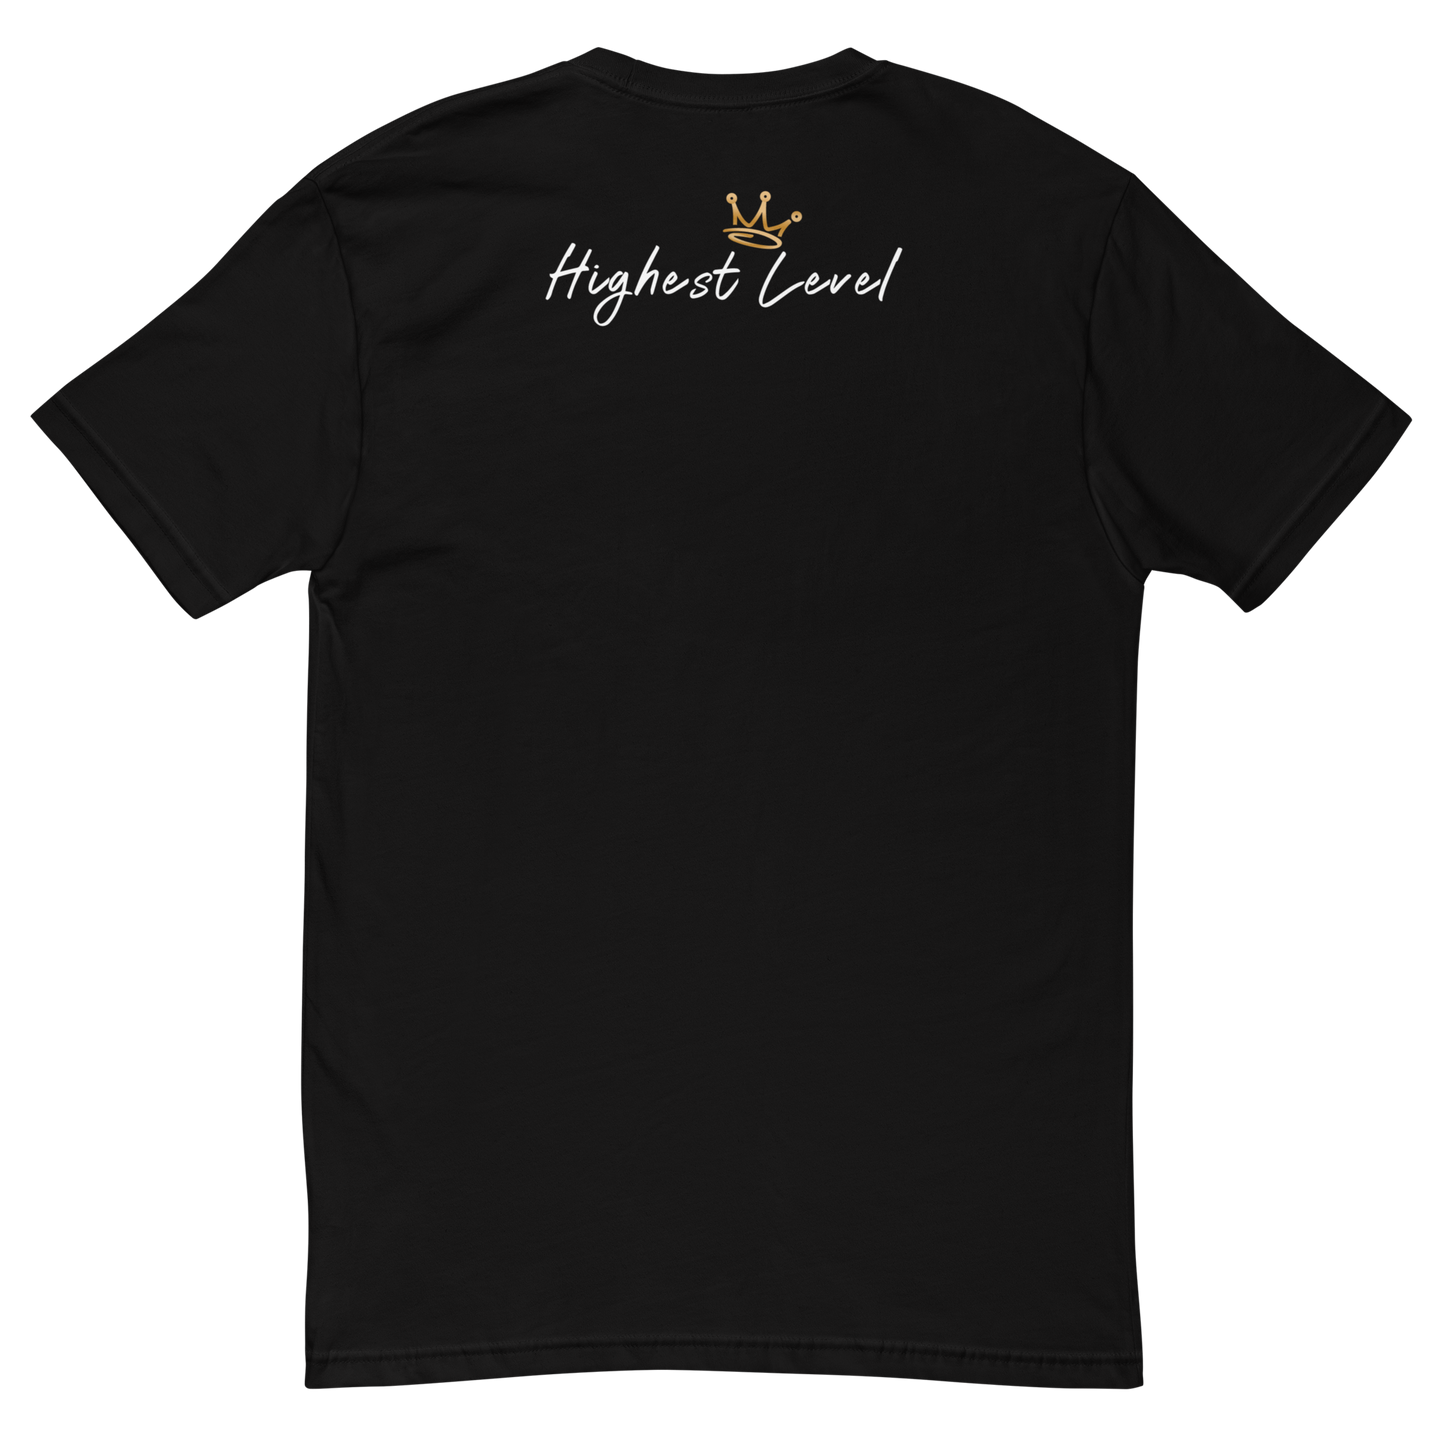 Heart of Lion Graphic T-shirt